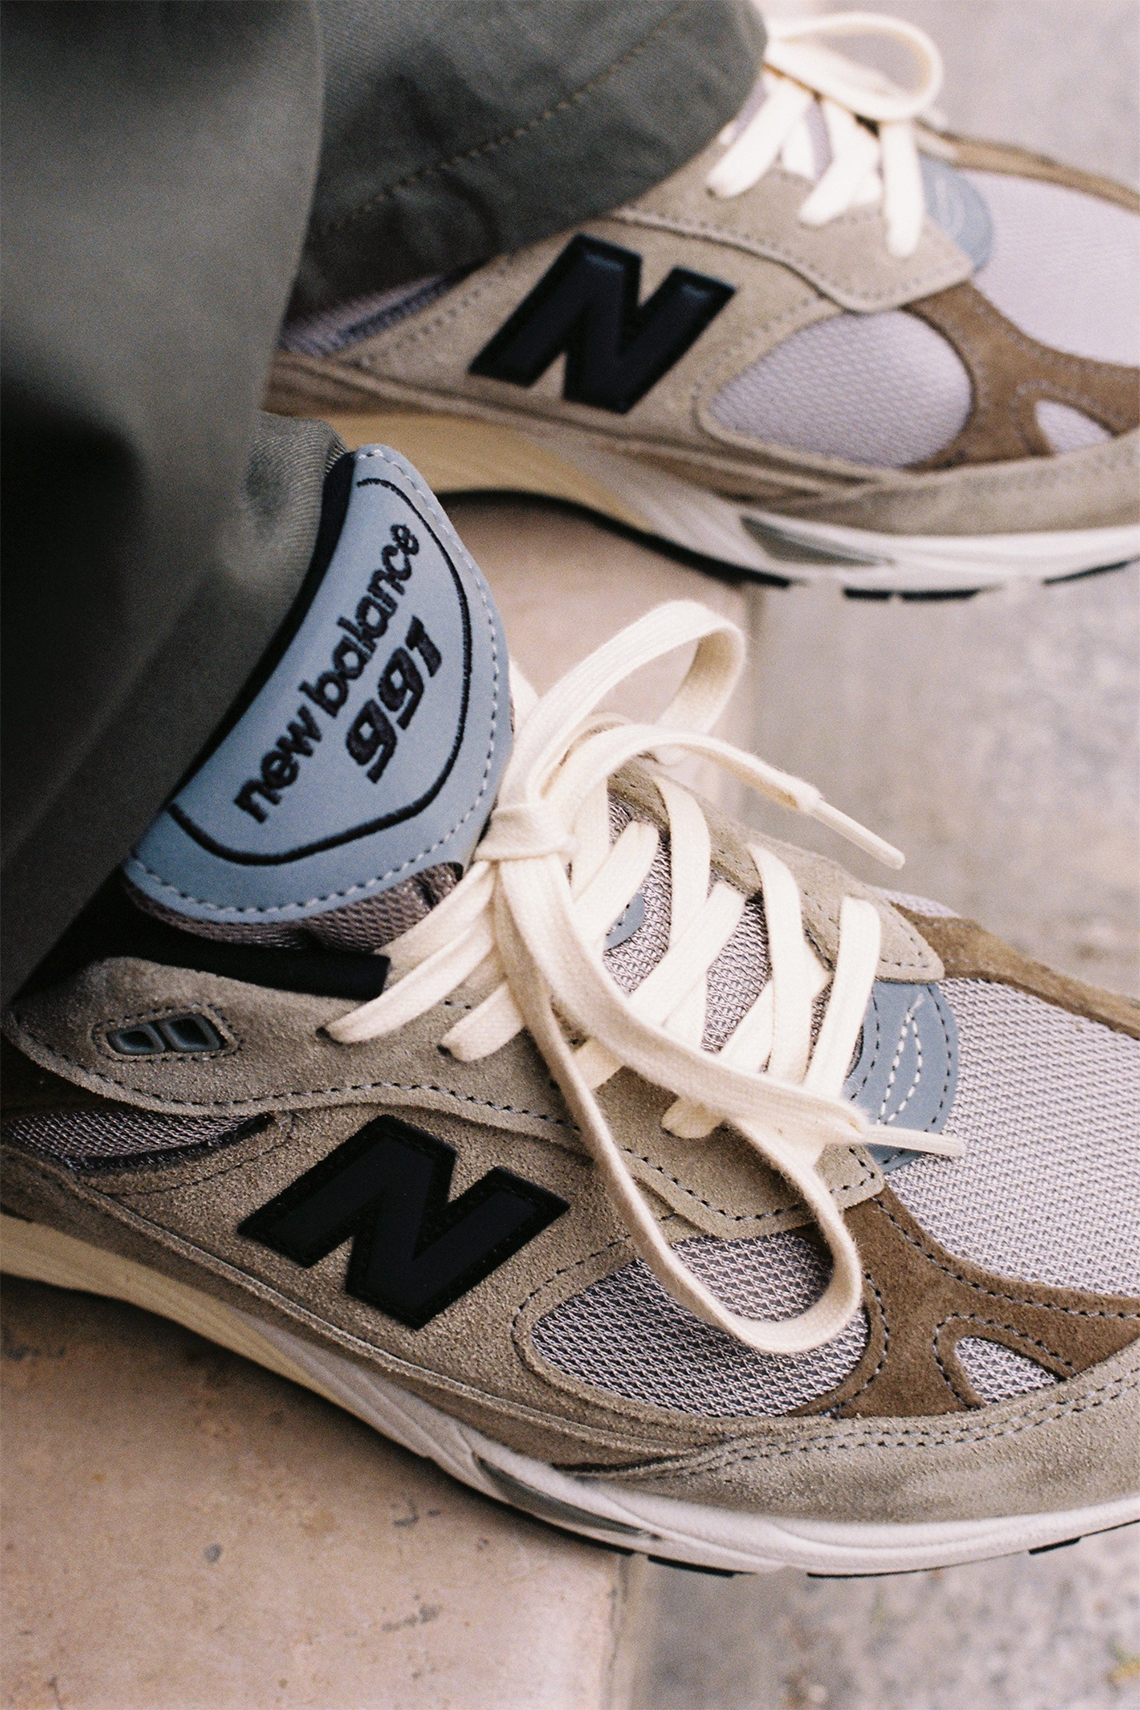 New Balance 515 Classic trainers in pink